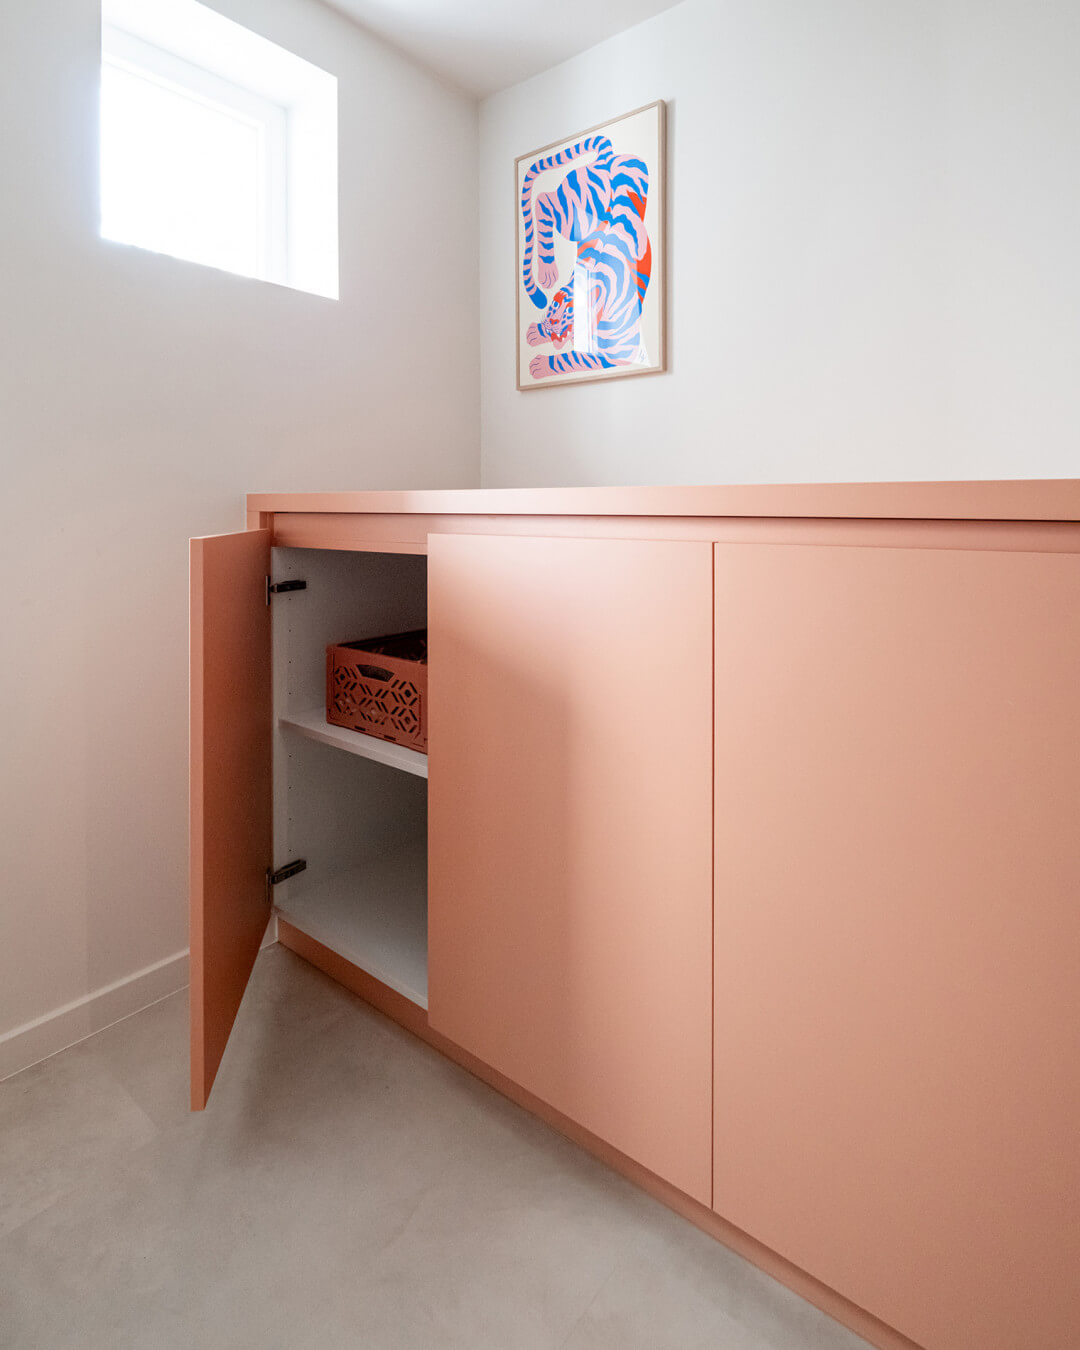 Custom-made pink storage cabinet in the laundry room of the Sundae House